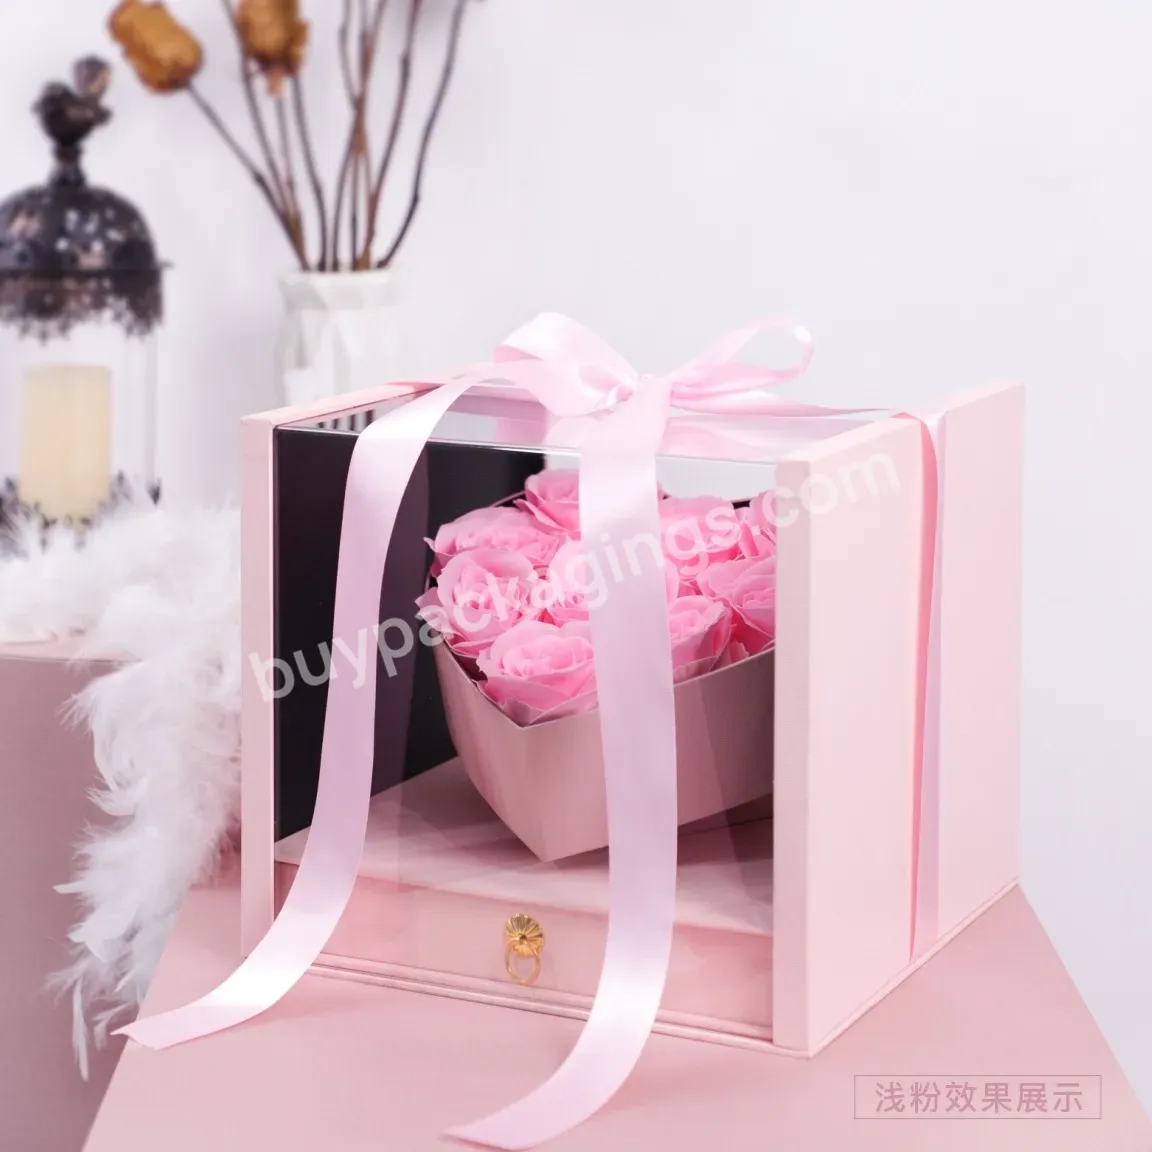 Surface Heavy Metal Finished Gift Box Magic Cube Flower Box Acrylic Box With Slotted Heart - Buy Surface Heavy Metal Finished Gift Box,Magic Cube Flower Box,Acrylic Box With Slotted Heart.